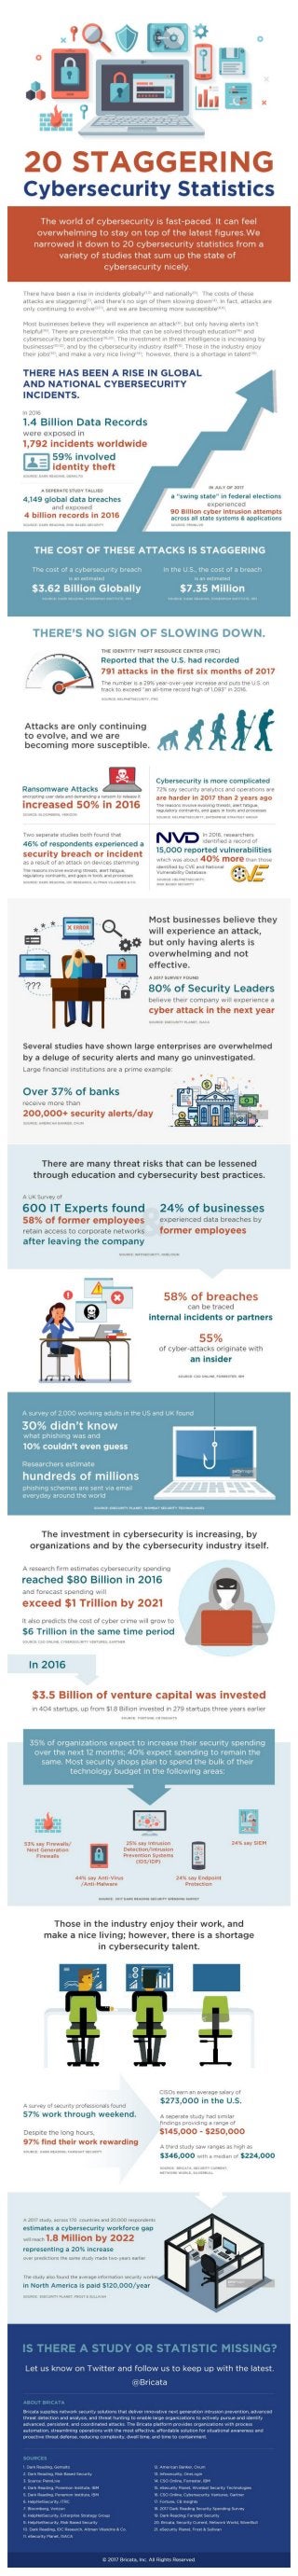 Costs and Incidents: Visualizing the Trends in Cybersecurity [infographic]